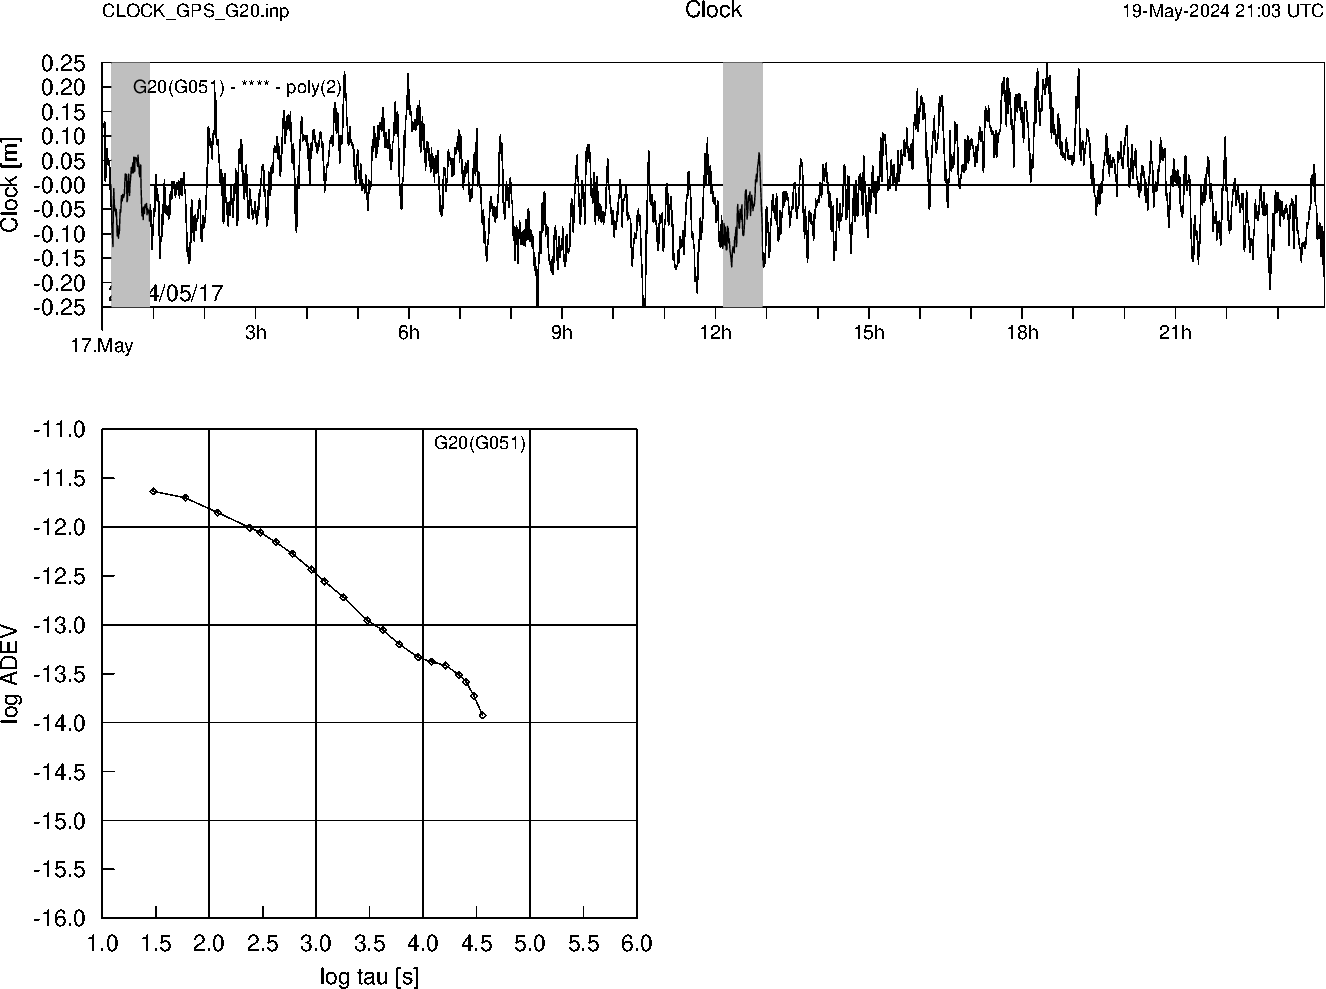 GPS G20 Clock Time Series and Allan Deviation